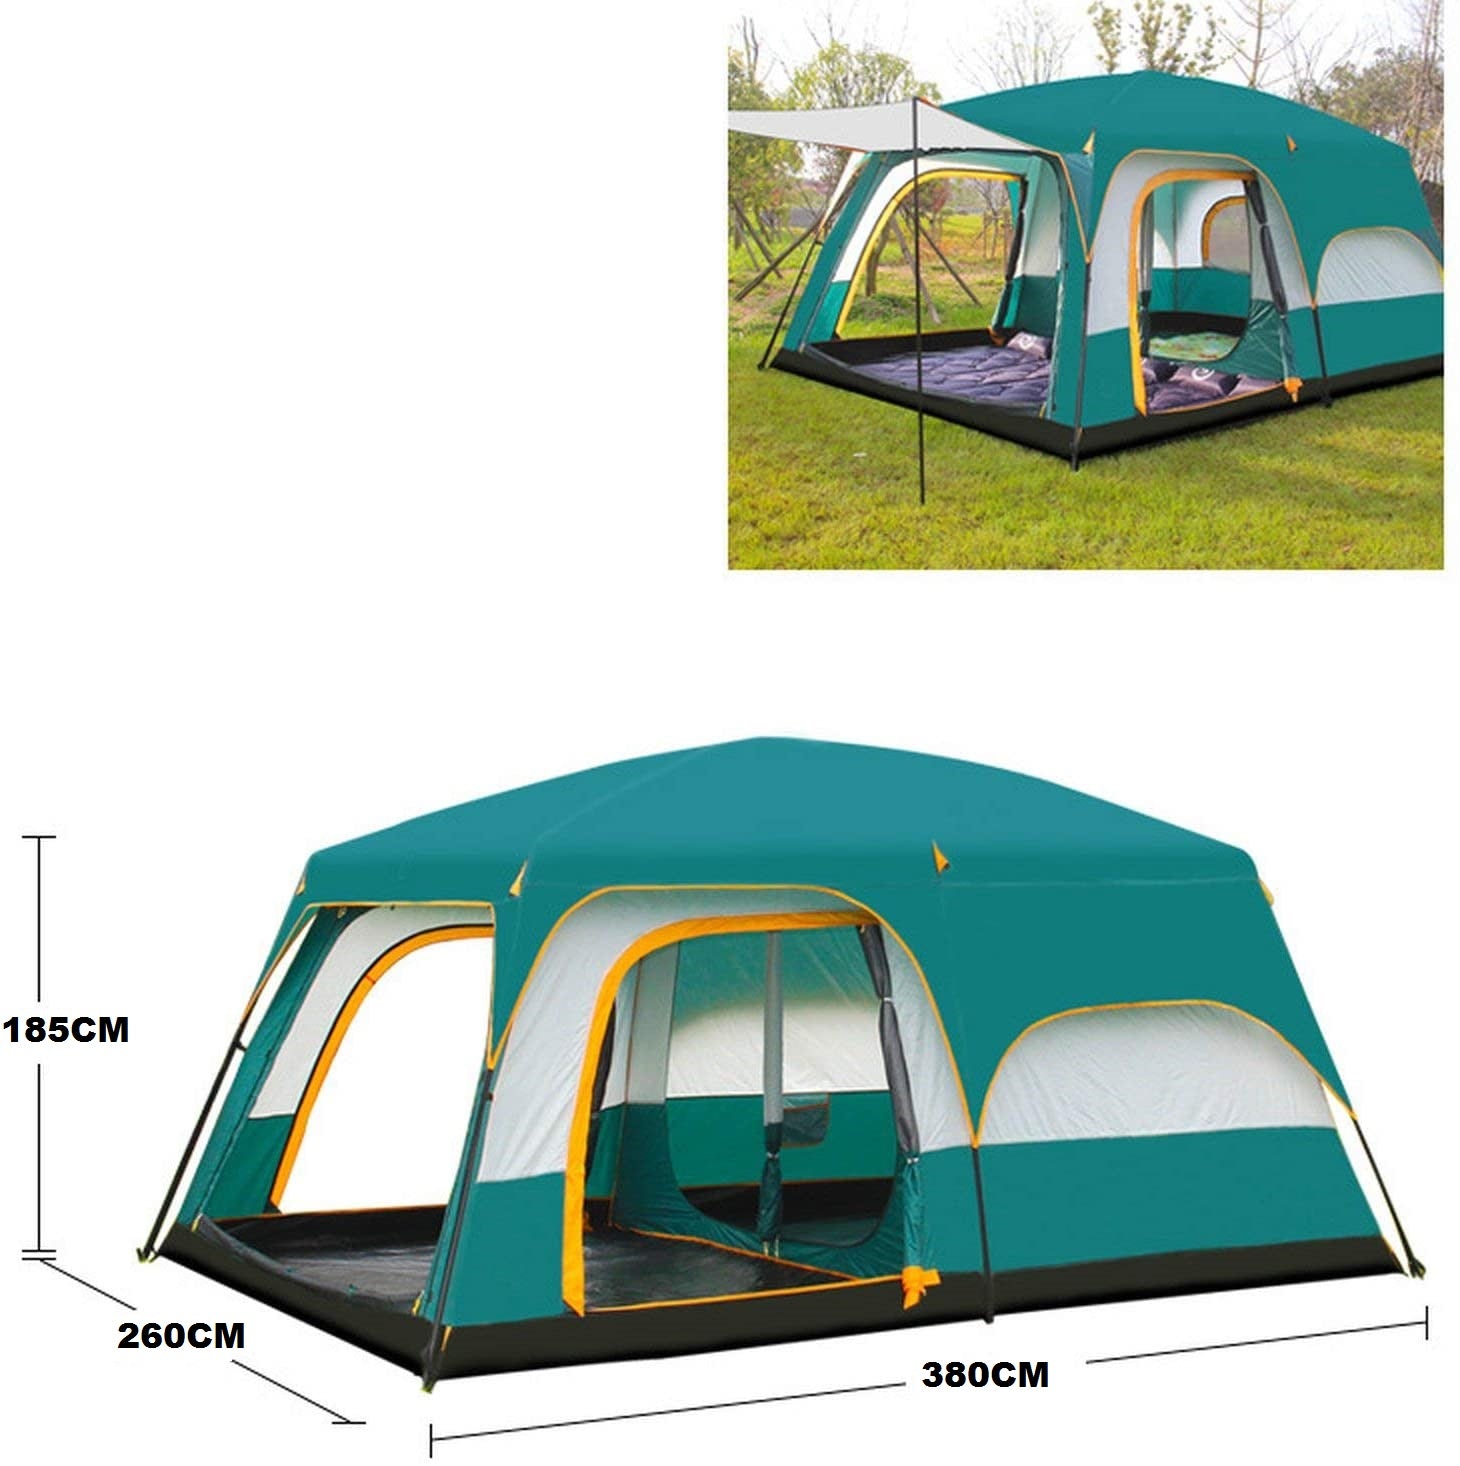 Large Family Camping Tent (8 Person) - The Shopsite